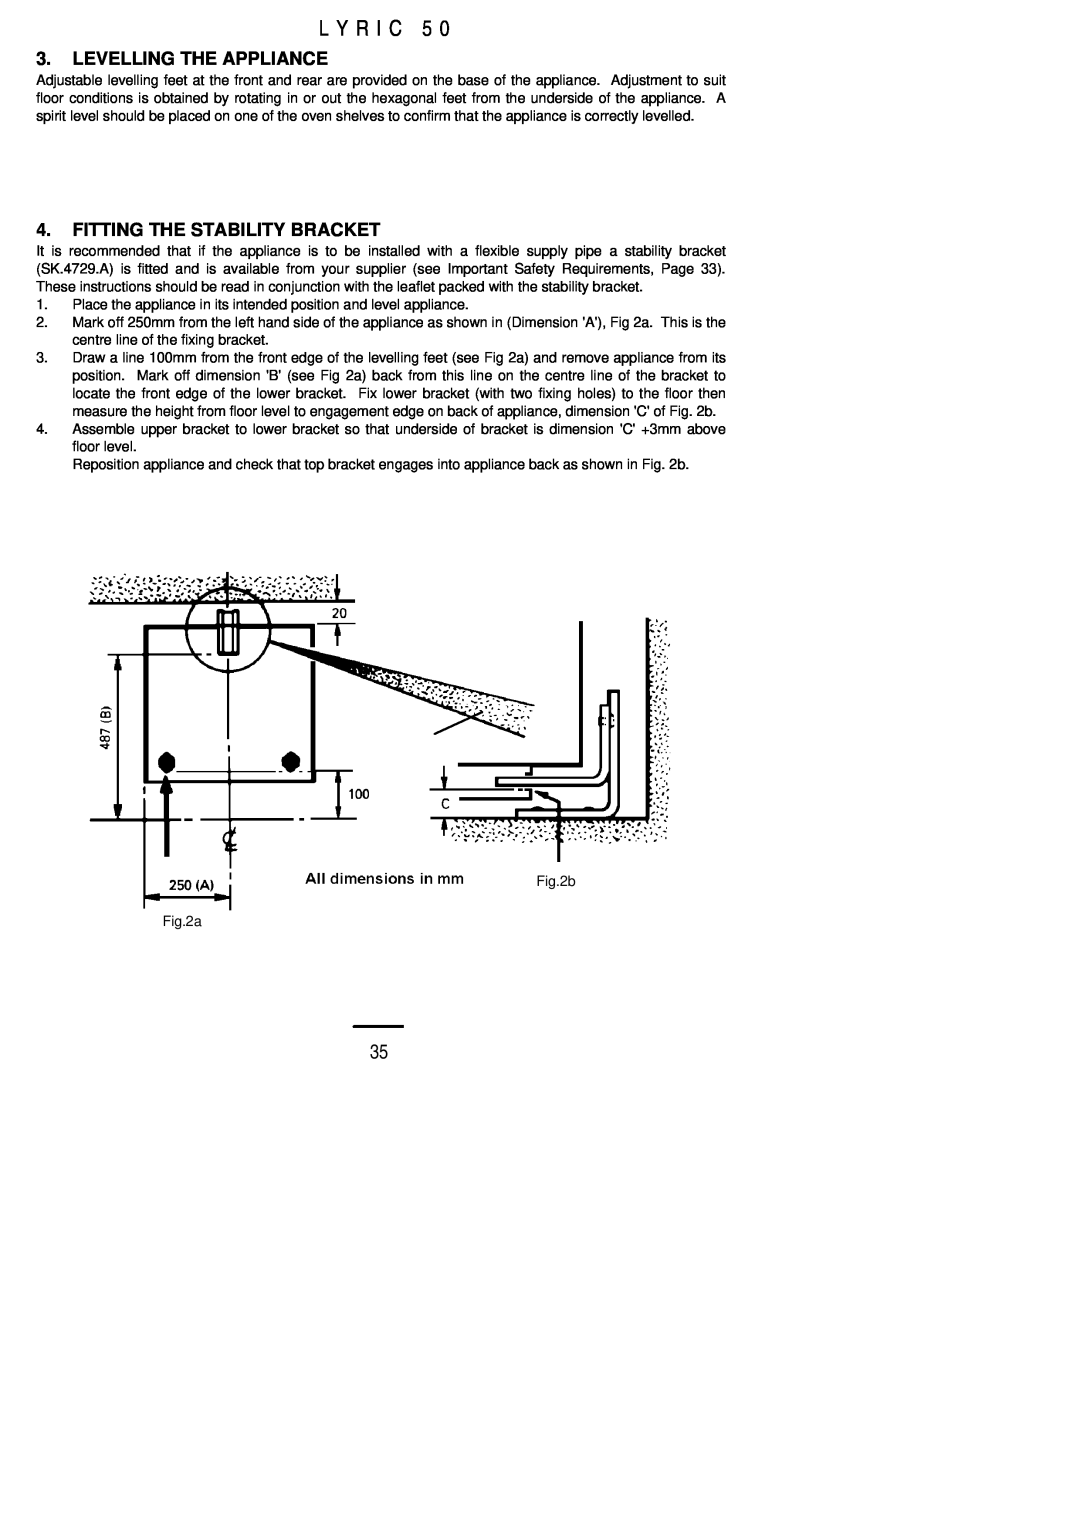 Electrolux Lynic 50 installation instructions L Y R I C, Levelling The Appliance, Fitting The Stability Bracket 